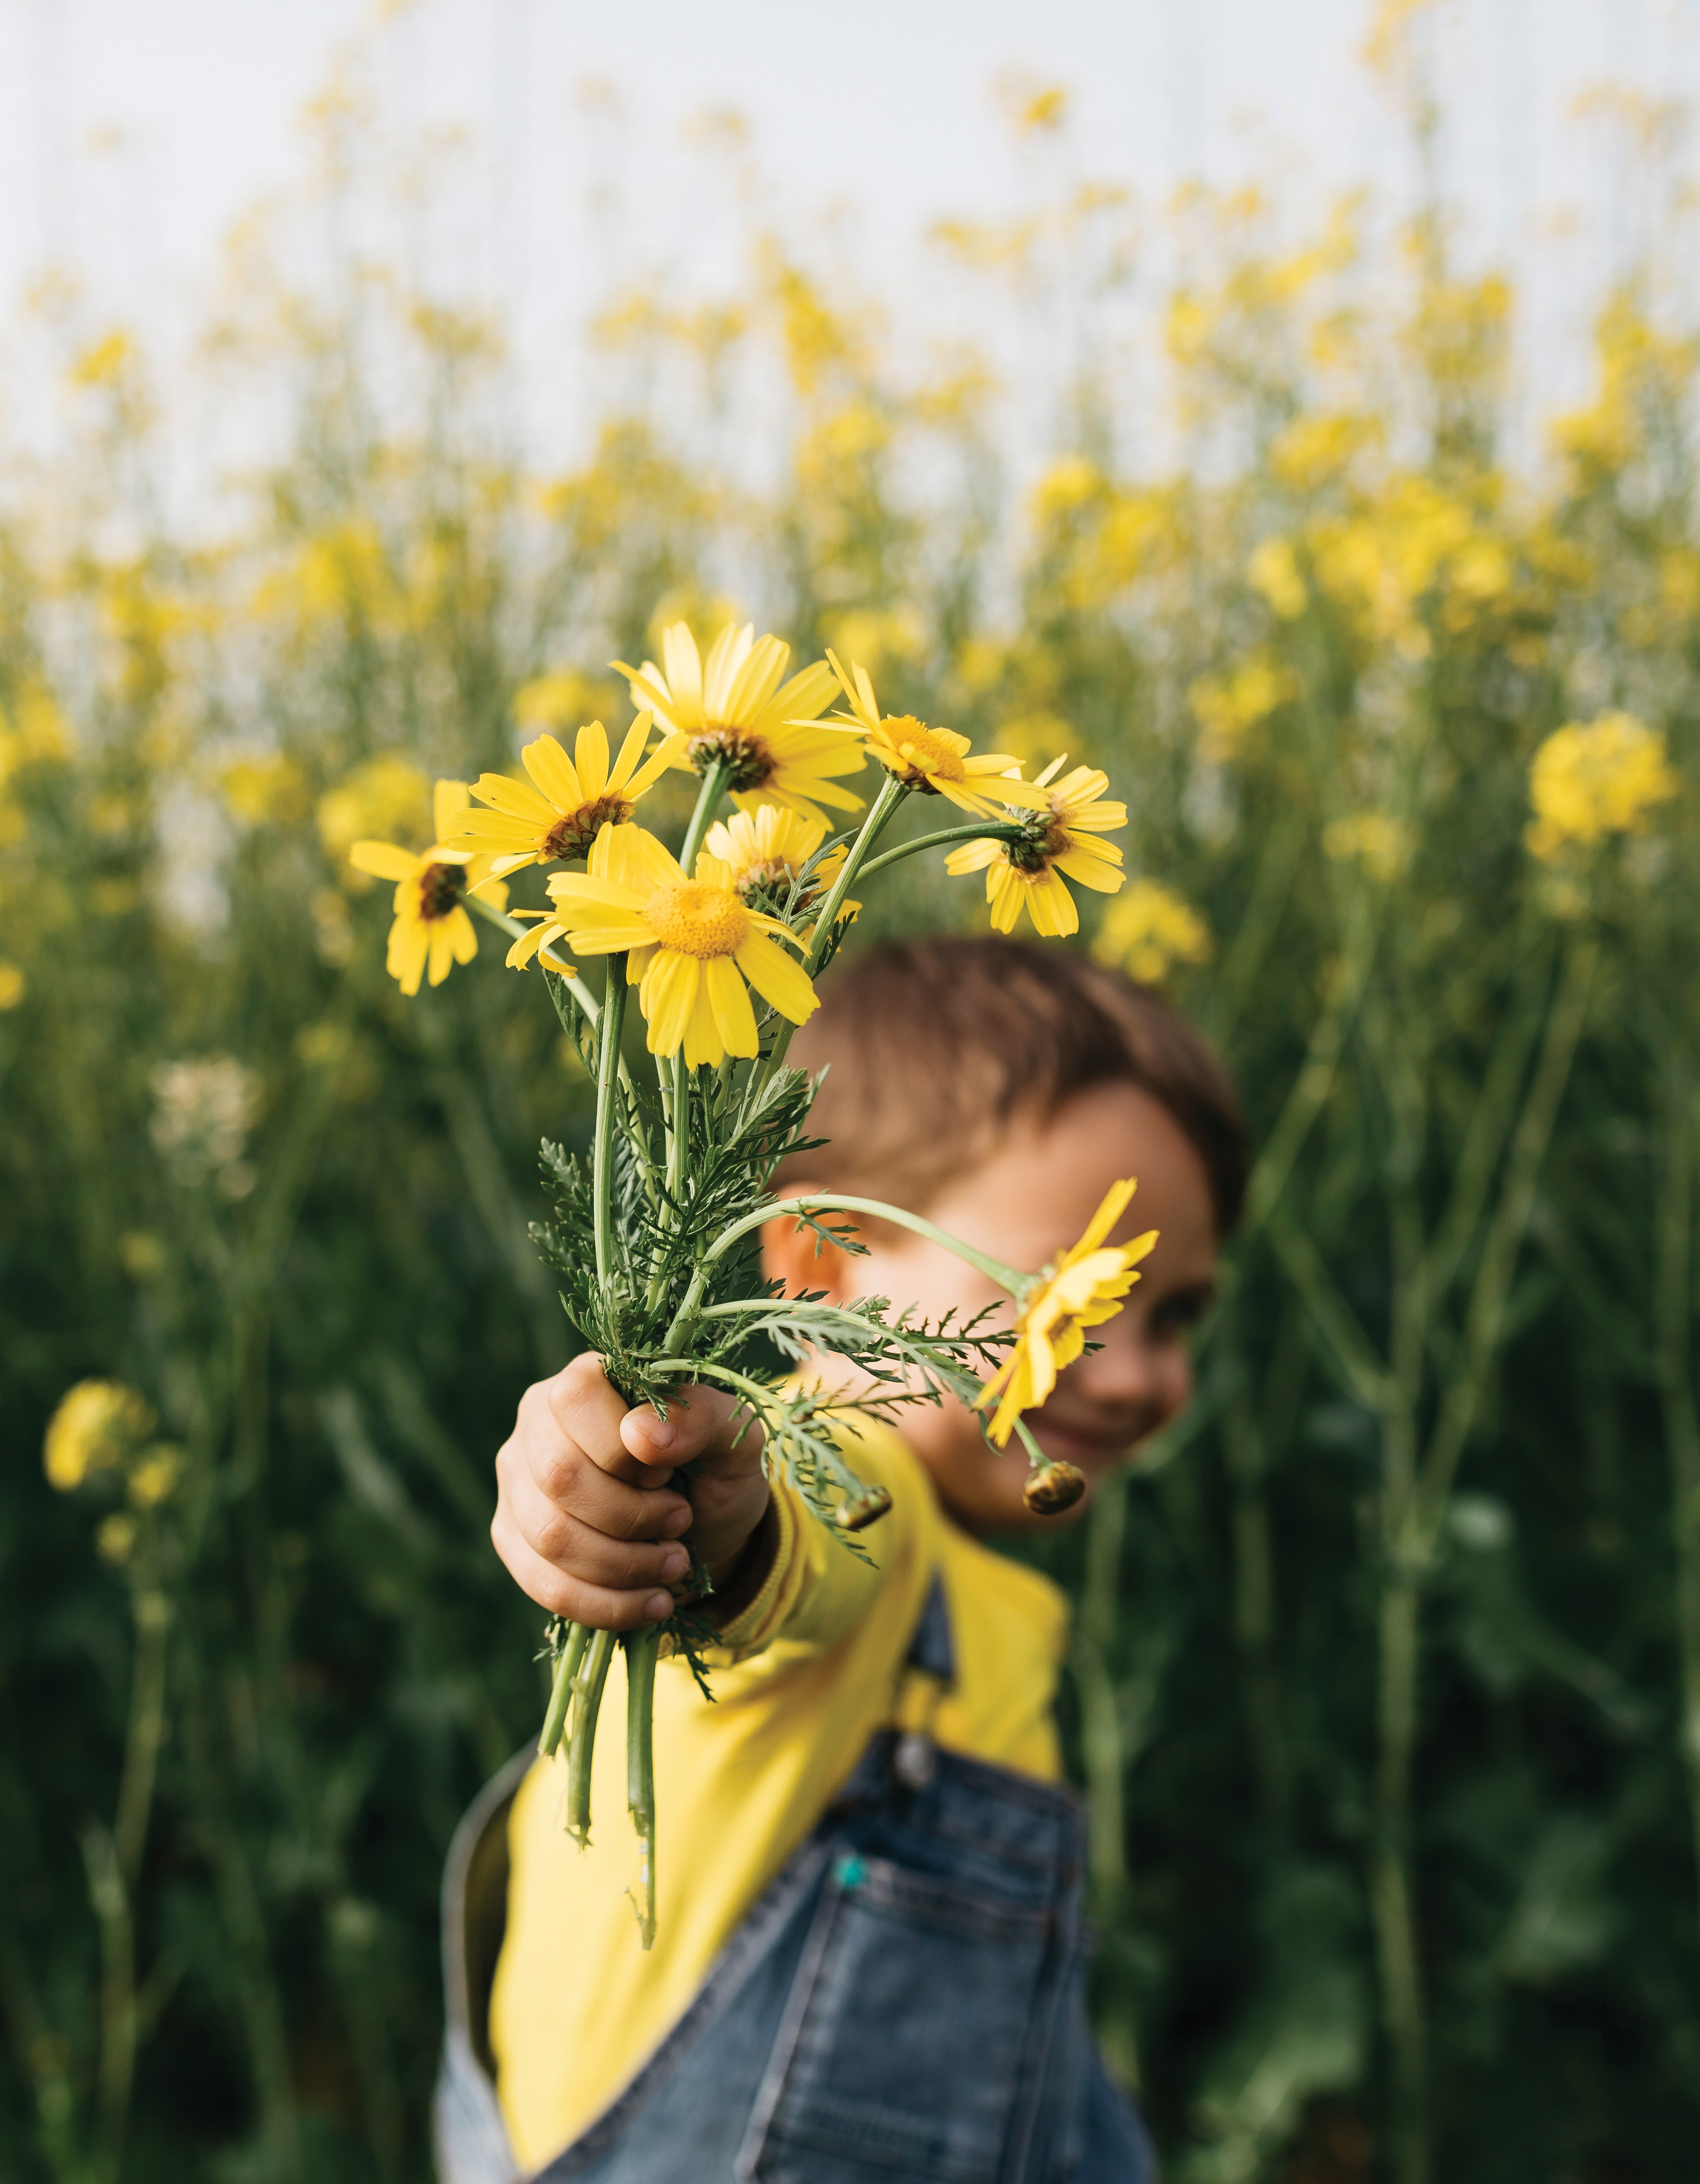 Little boy's hand holding picked yellow flowers in front of rape field (Foto: Getty Images/Westend61)